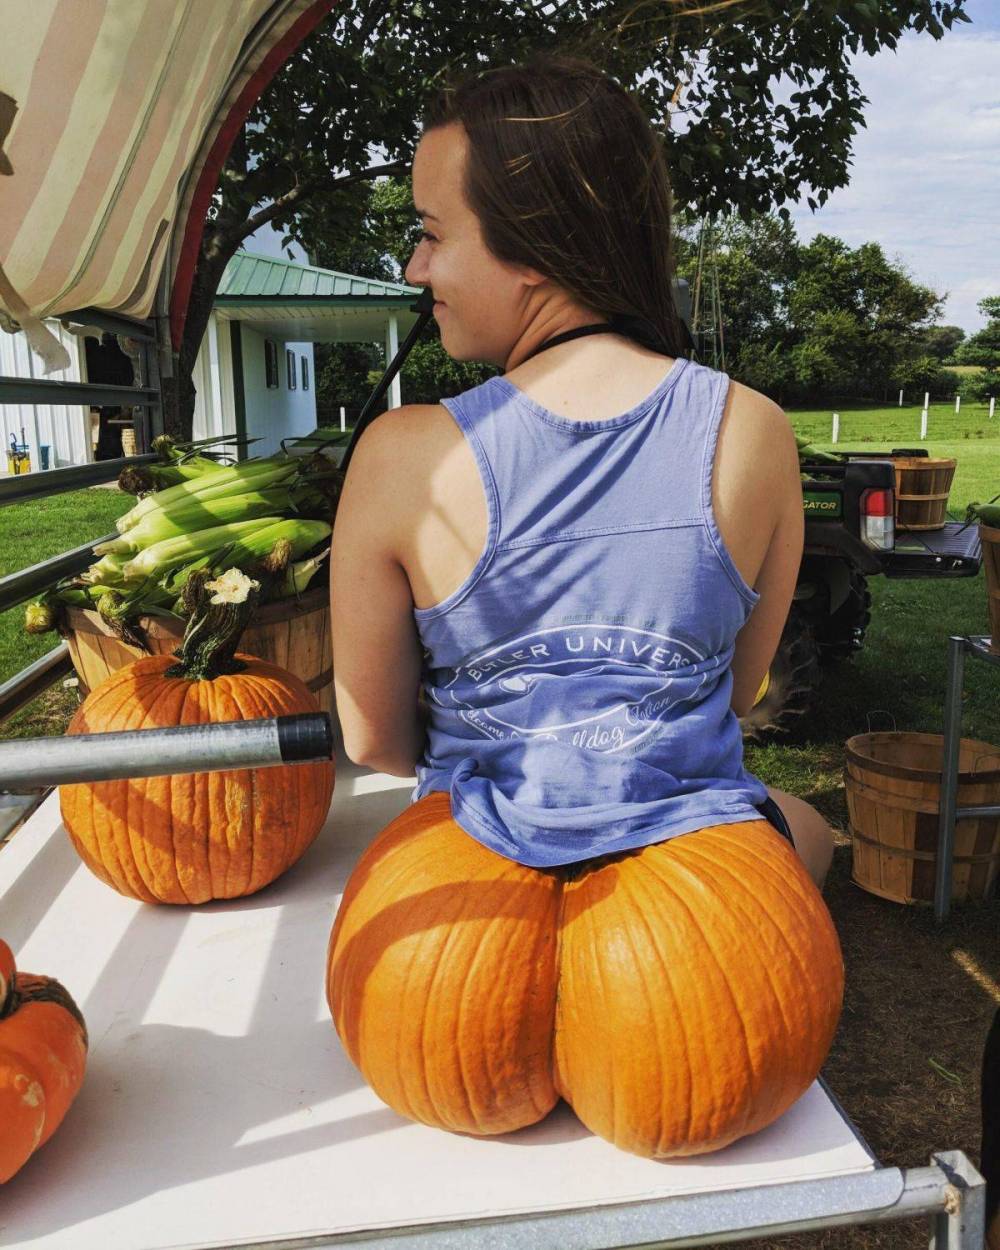 daily dose of awesome - pumpkin butts